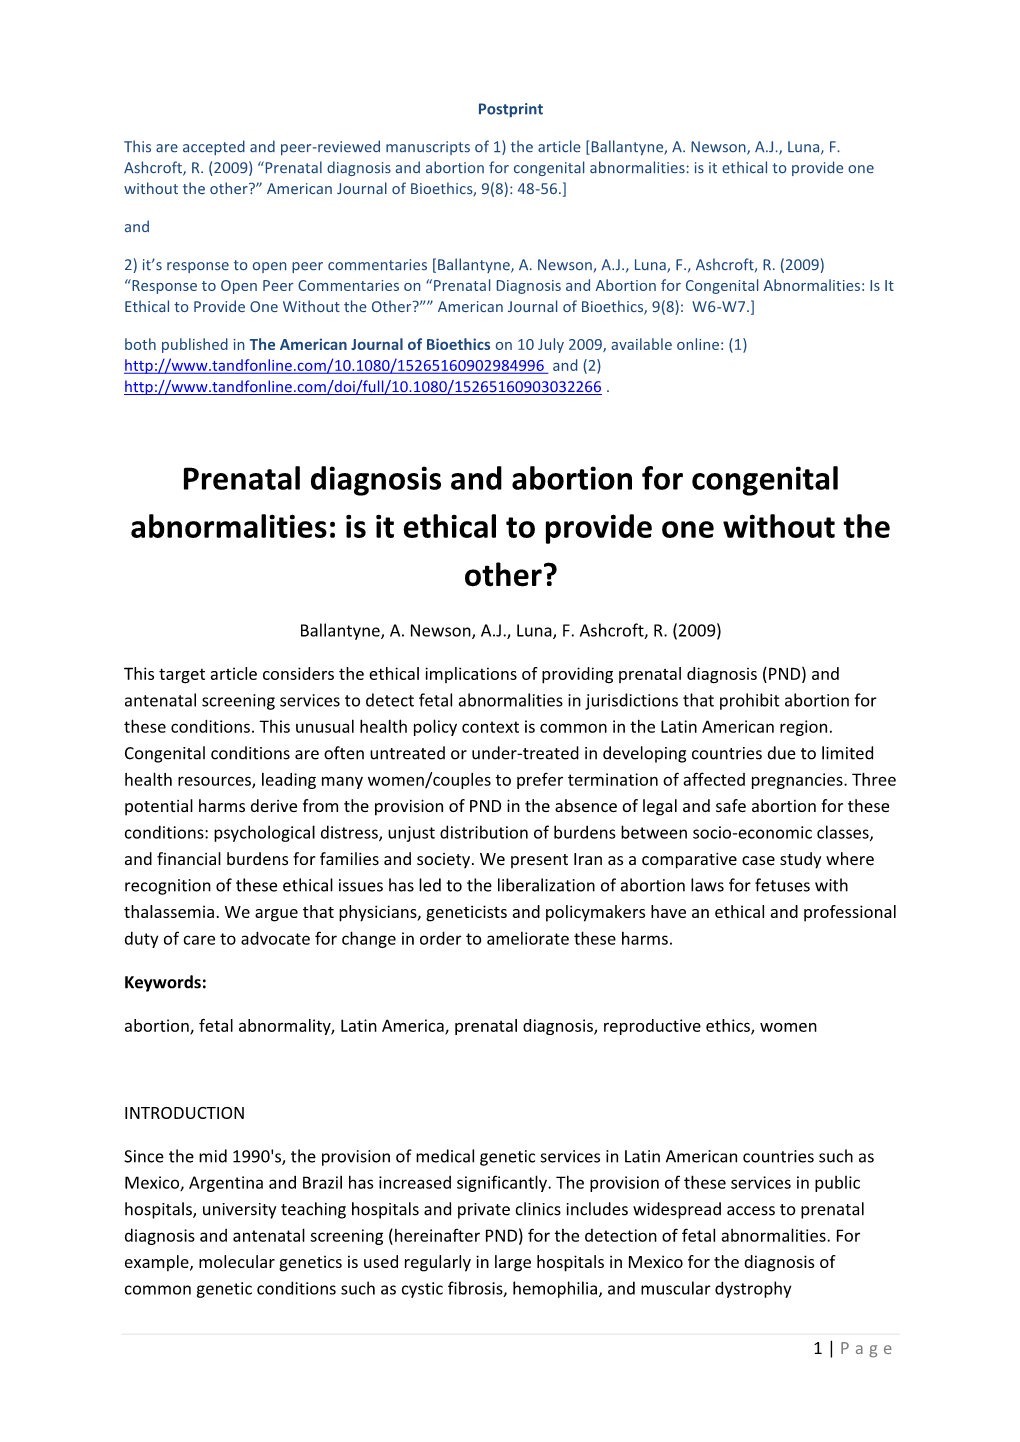 Prenatal Diagnosis and Abortion for Congenital Abnormalities: Is It Ethical to Provide One Without the Other?” American Journal of Bioethics, 9(8): 48-56.] And